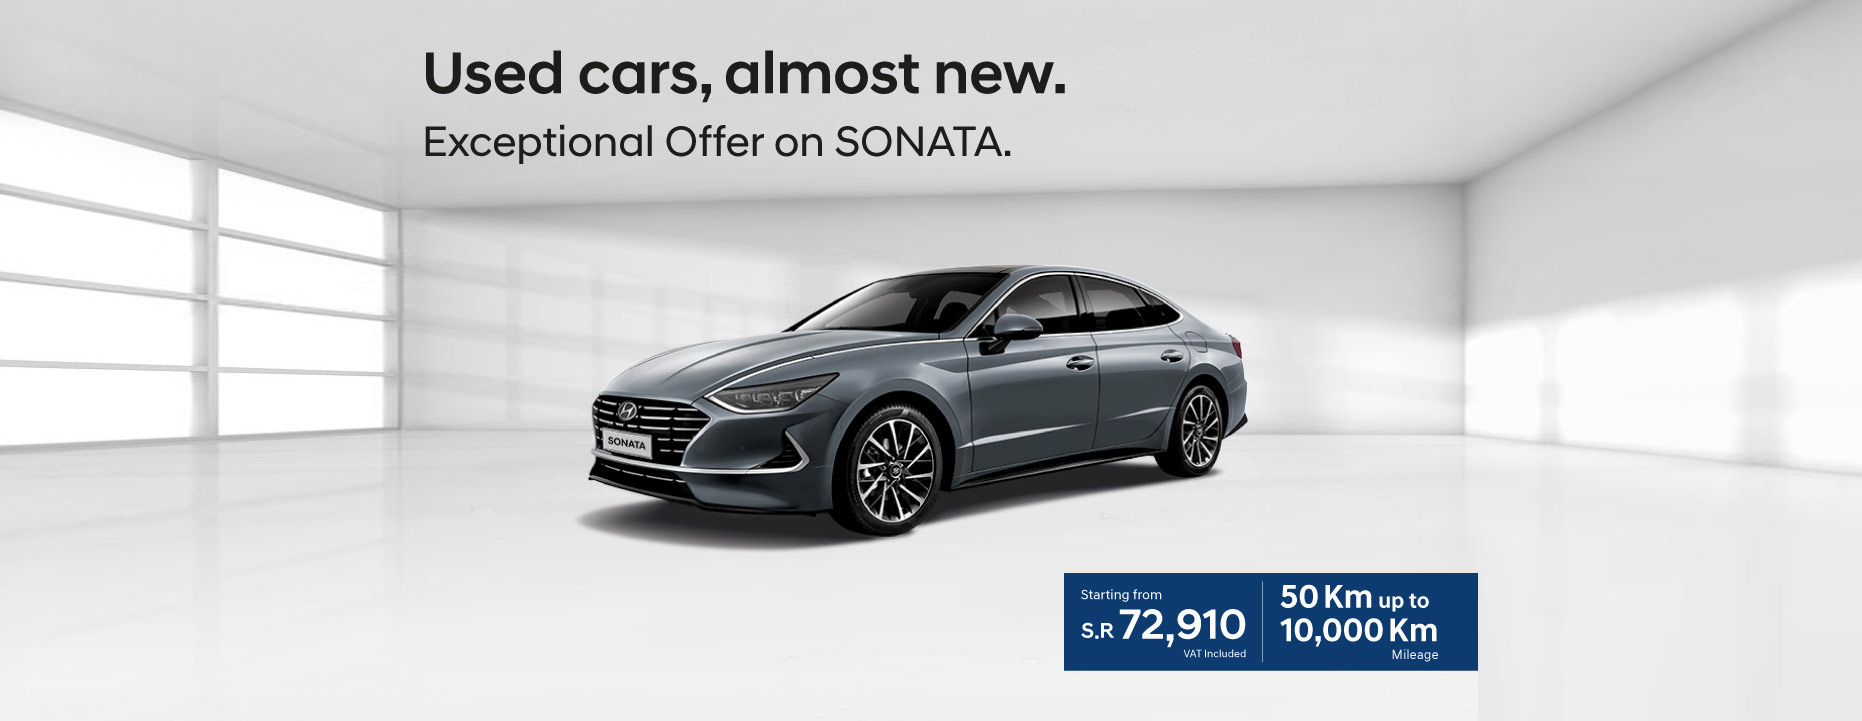 Used cars, almost new. Exceptional Offer on SONATA.